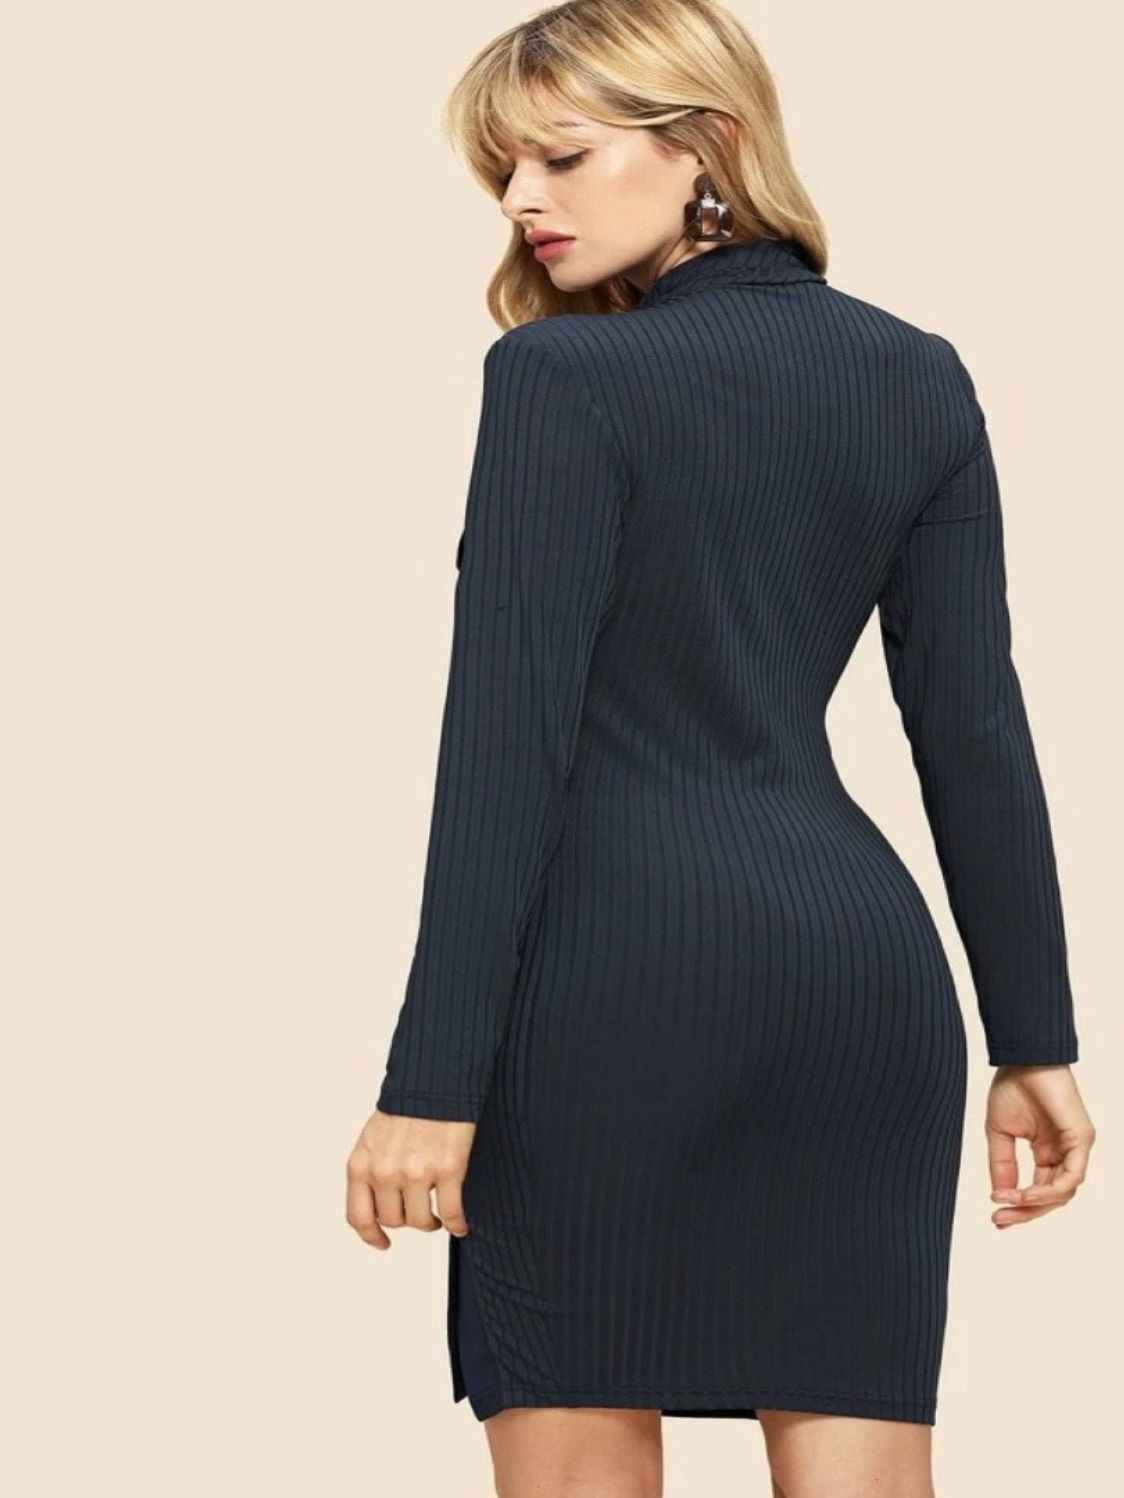 Navy Ribbed Buttoned Up Dress